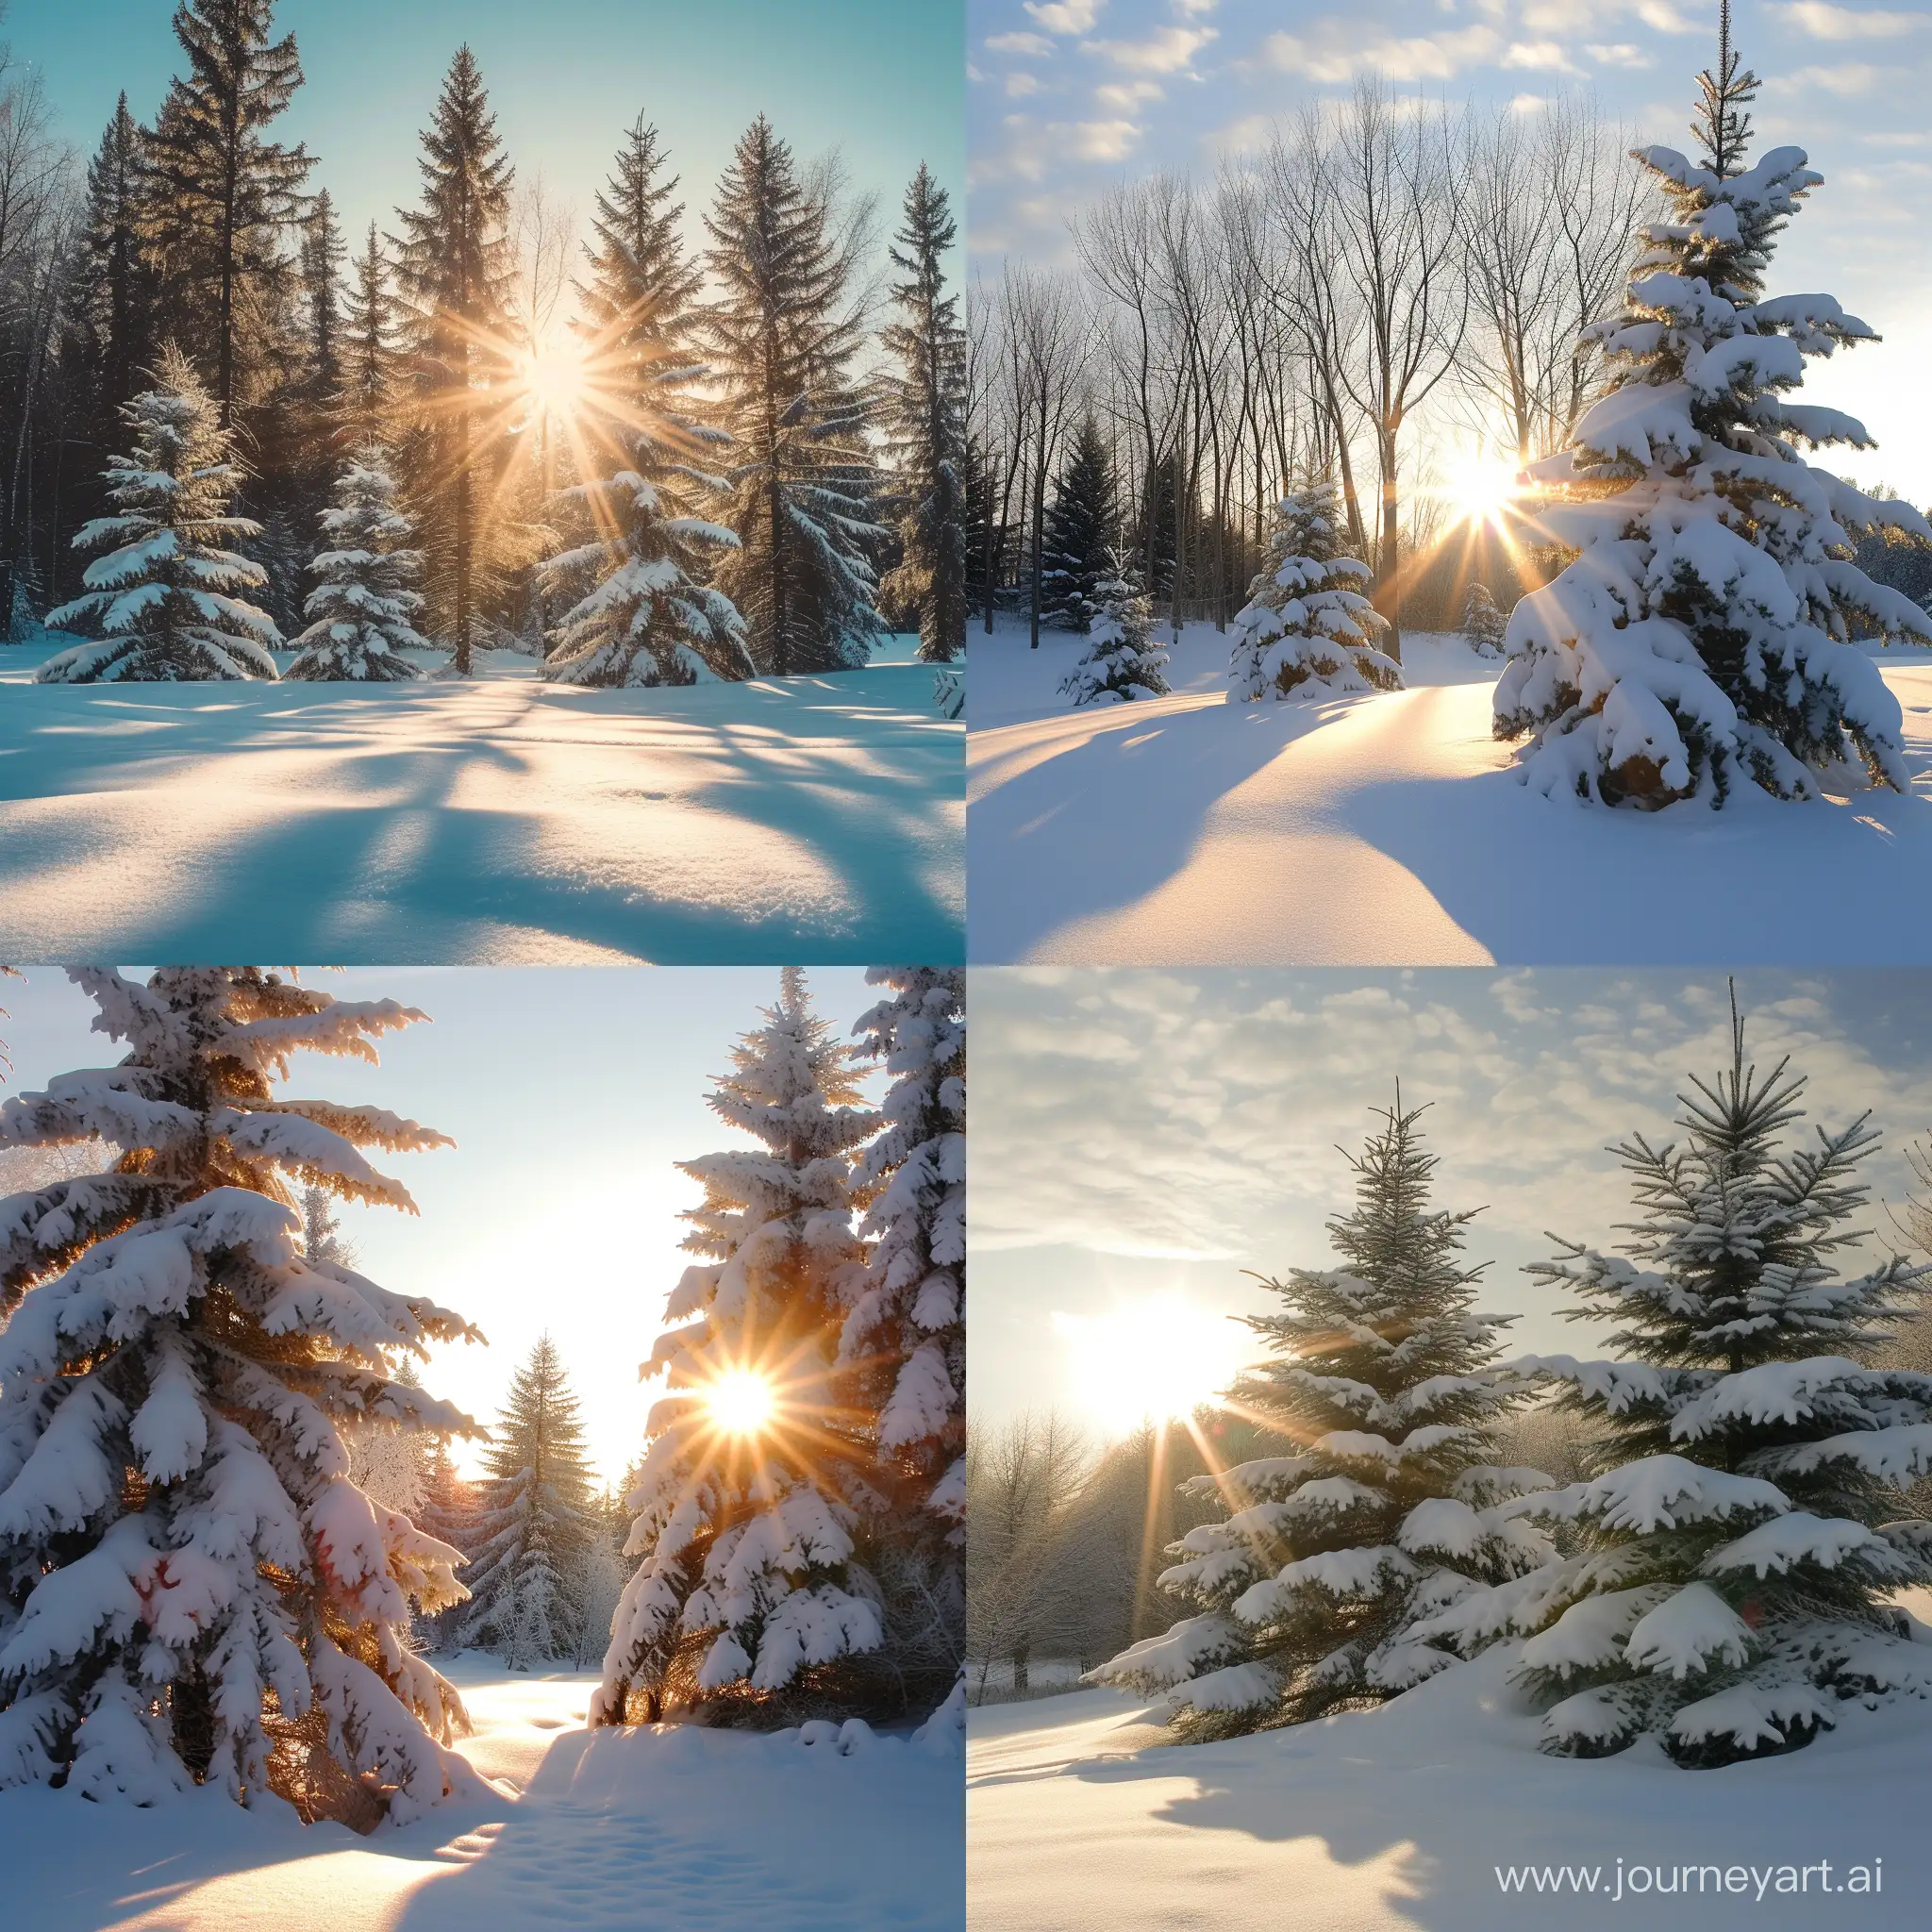 Winter-Wonderland-with-Sunlit-Christmas-Trees-in-Snow